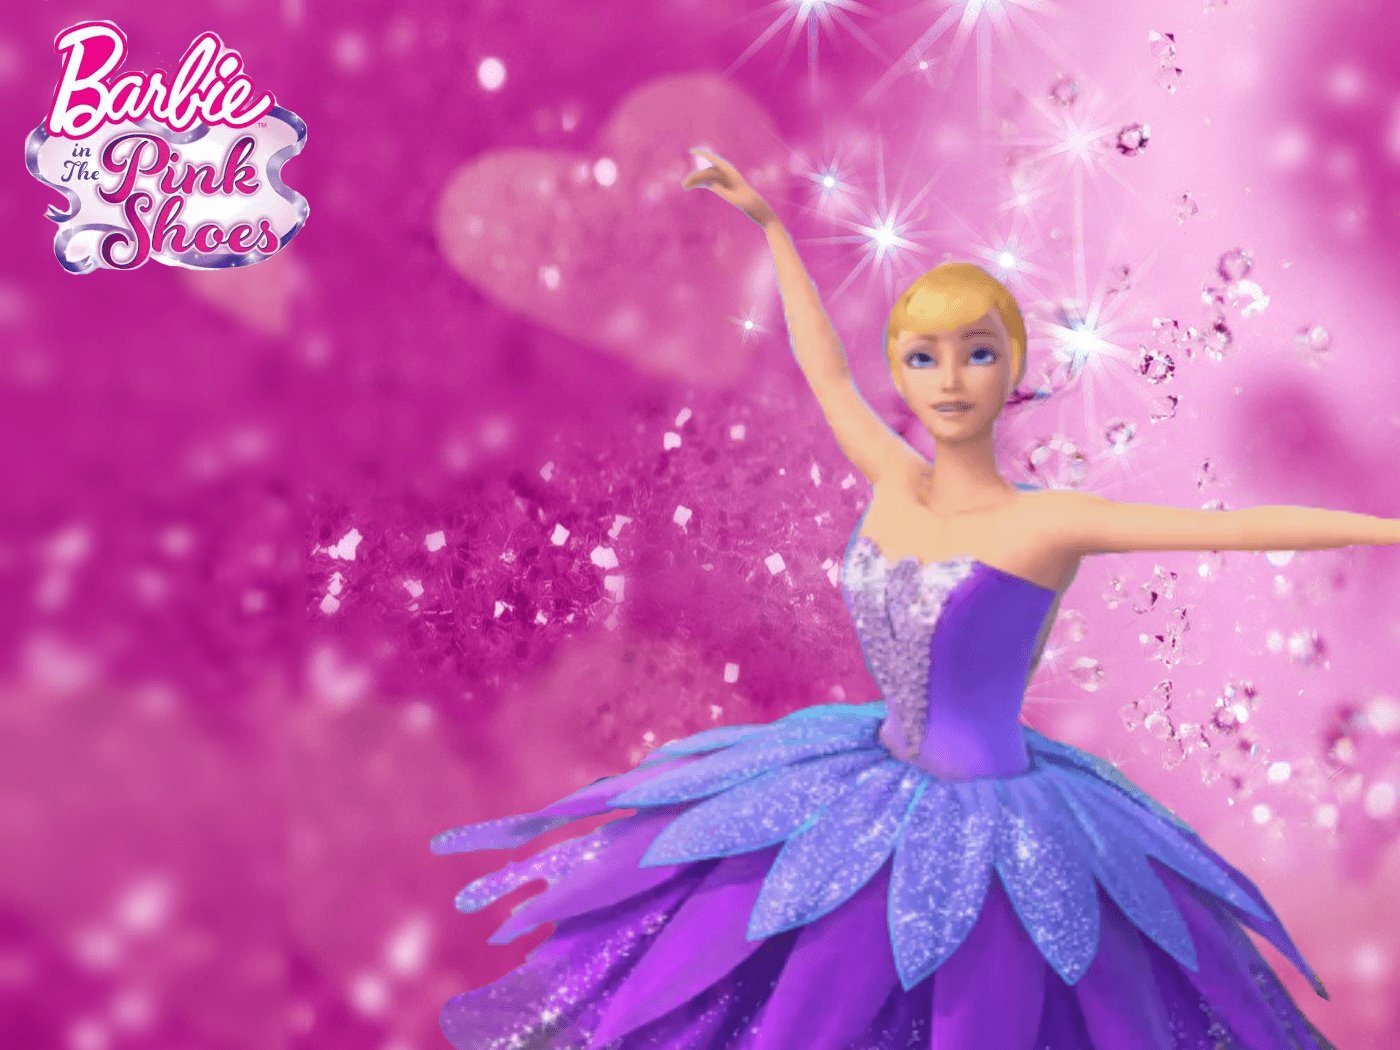 Barbie In The Pink Shoes Movies Wallpaper. Barbie